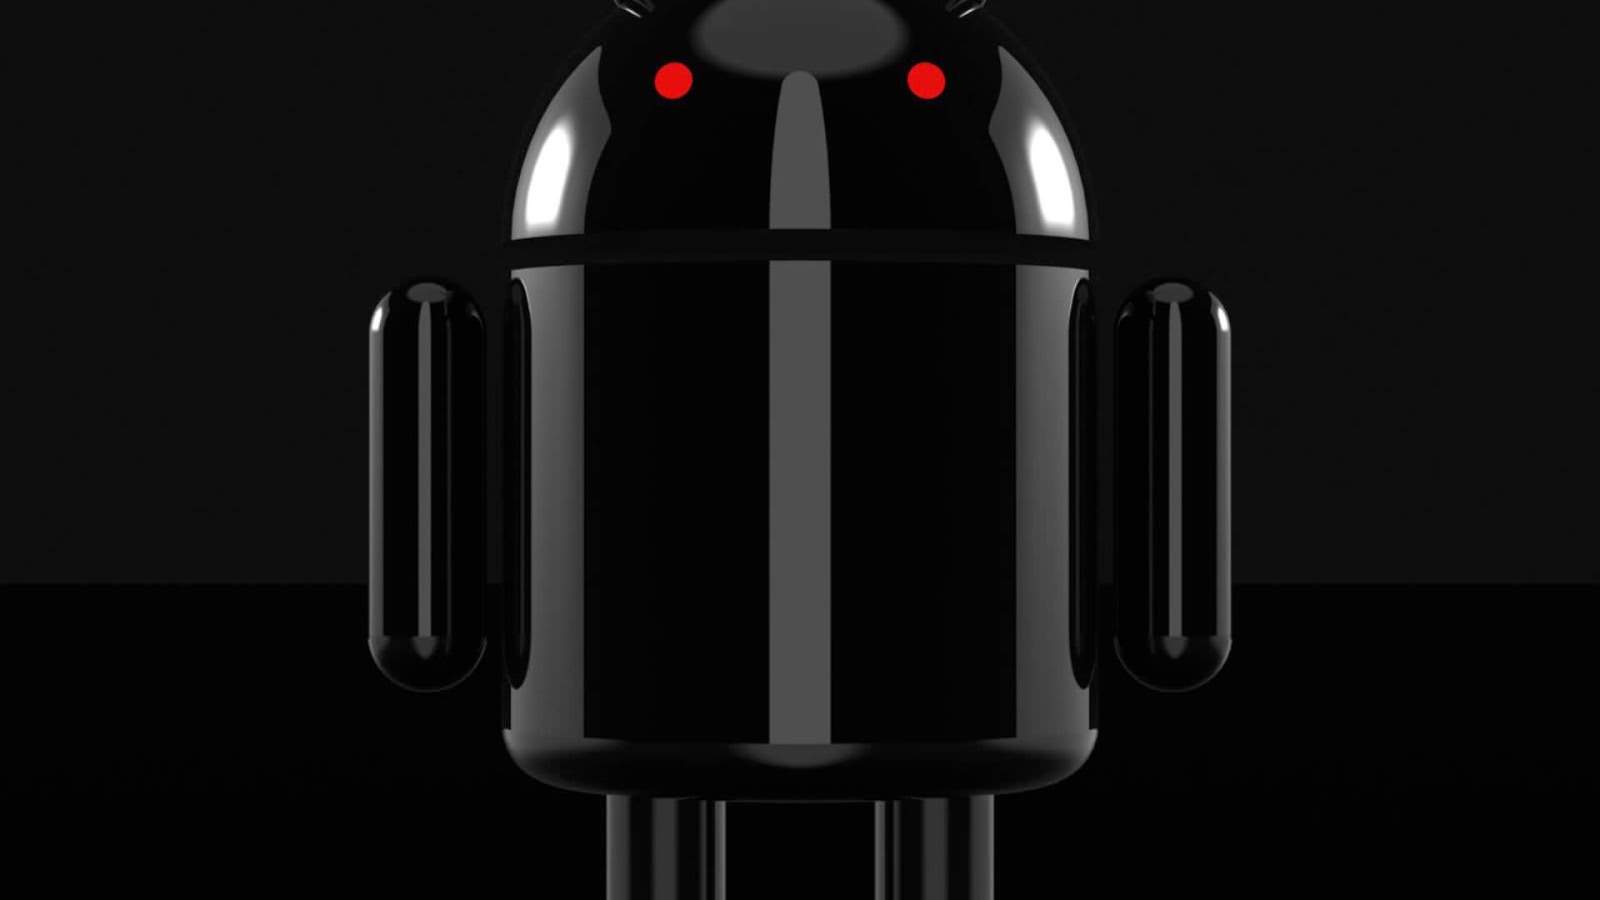 Image of a black robot with red eyes.